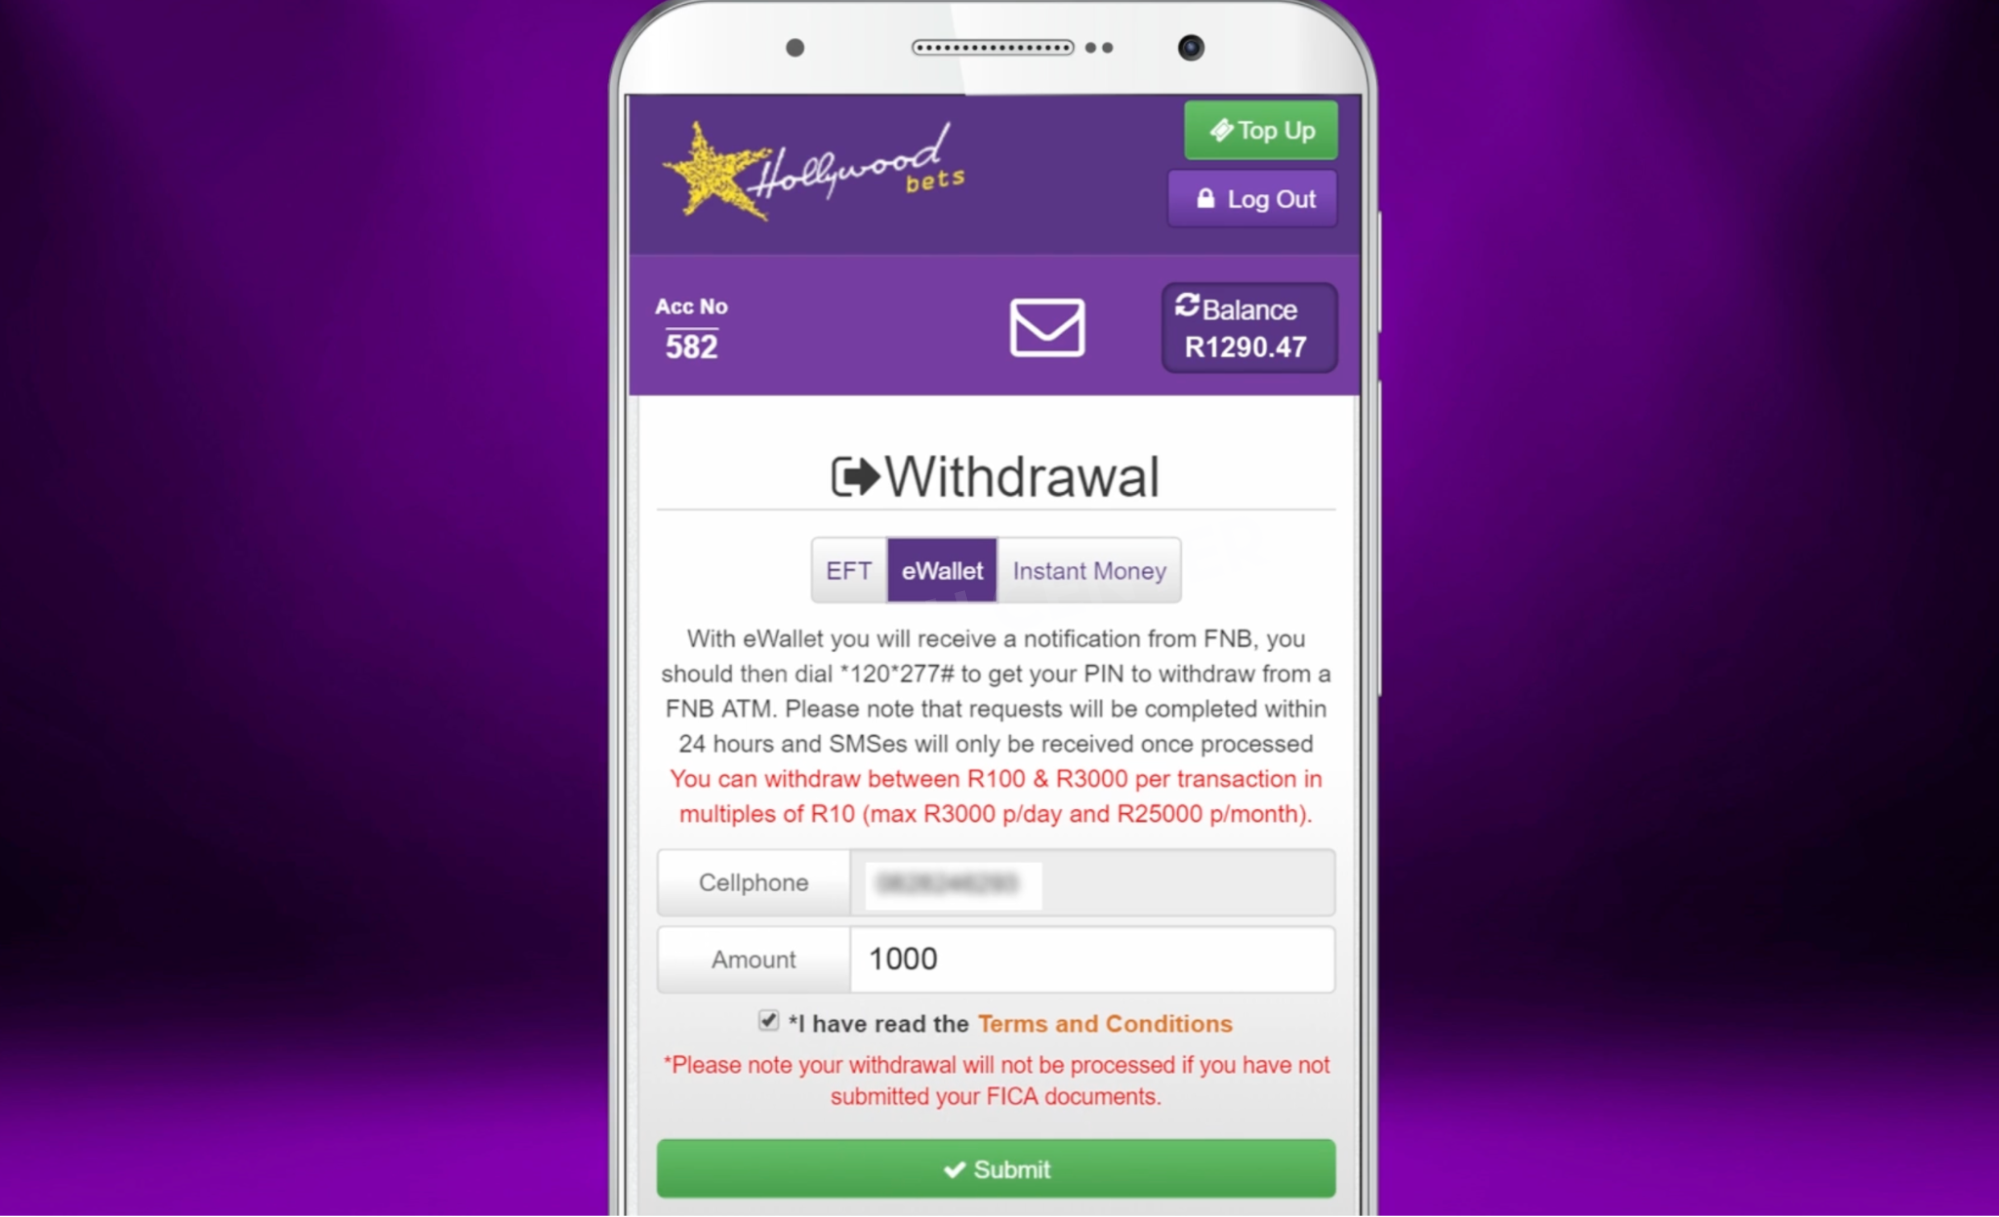 Ewallet withdrawals at Hollywoodbets